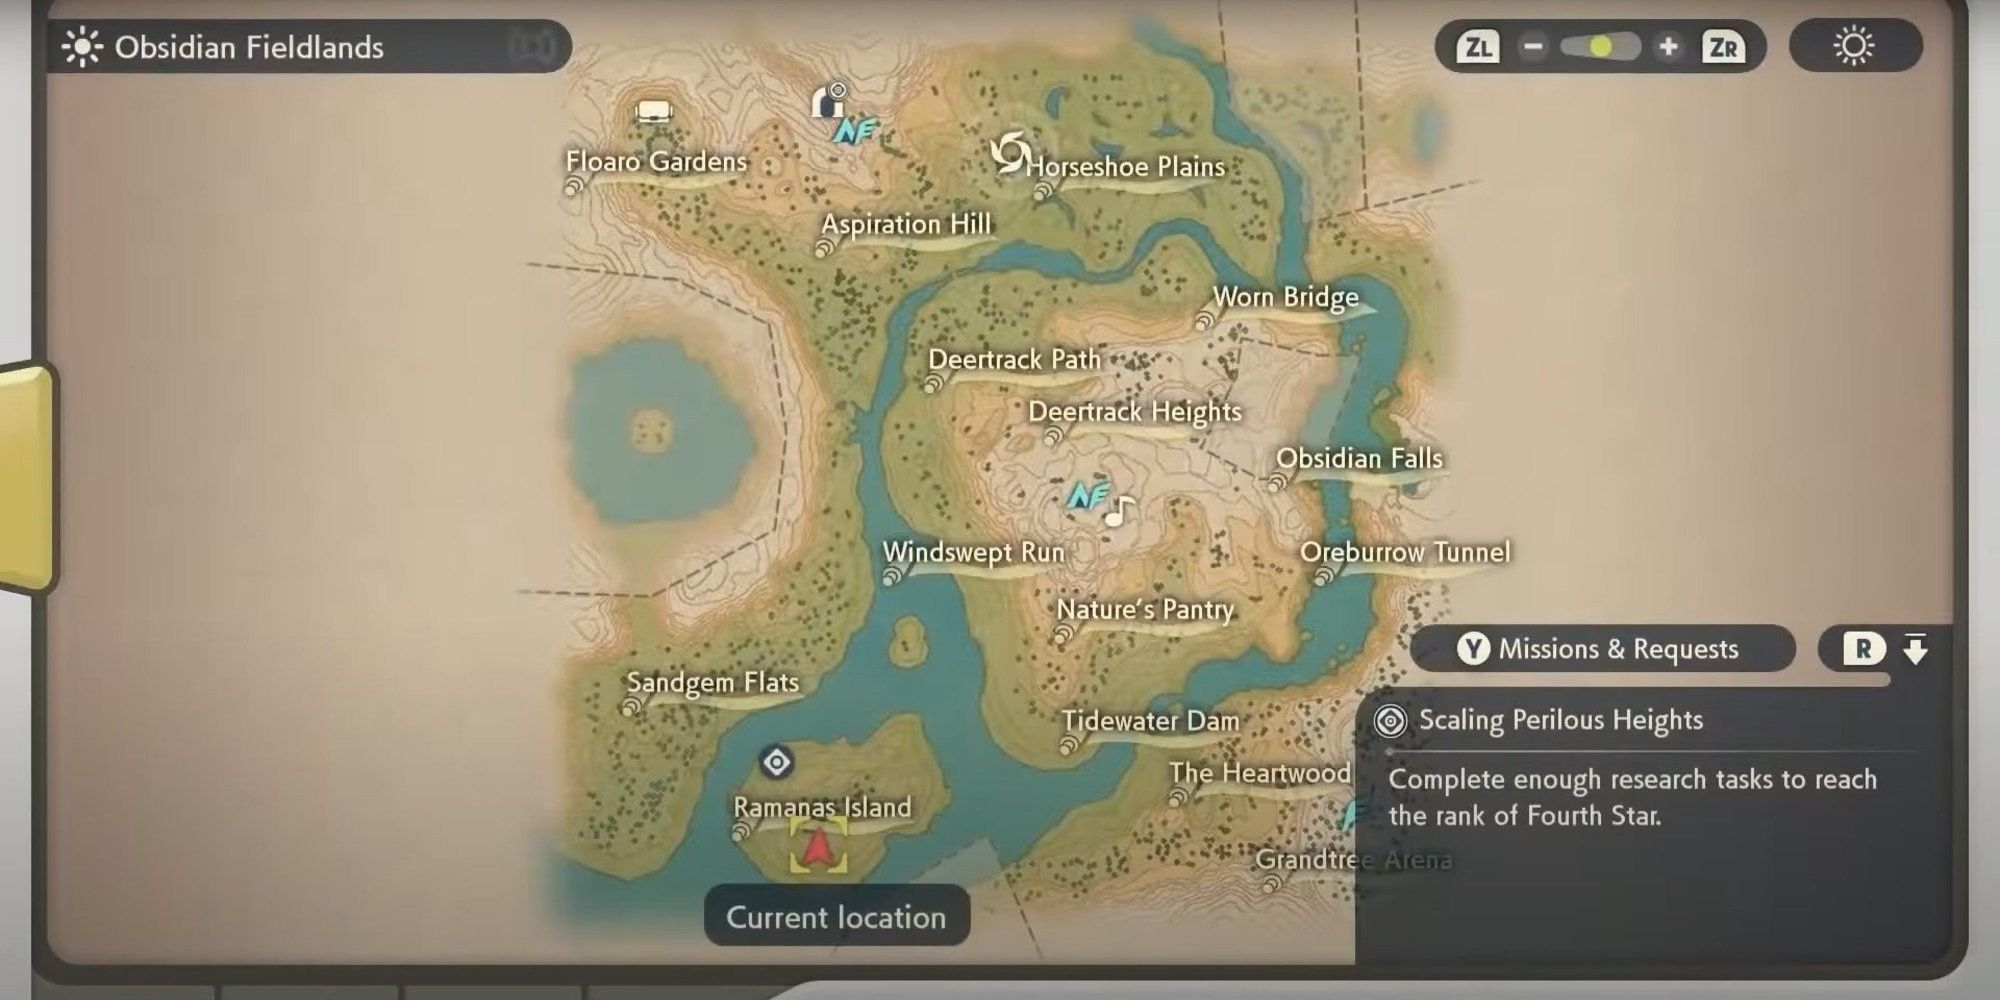 The map of Obsidian Fieldlands in Pokemon Legends Arceus showcasing all of the areas in this region as well as where the character's current location is.